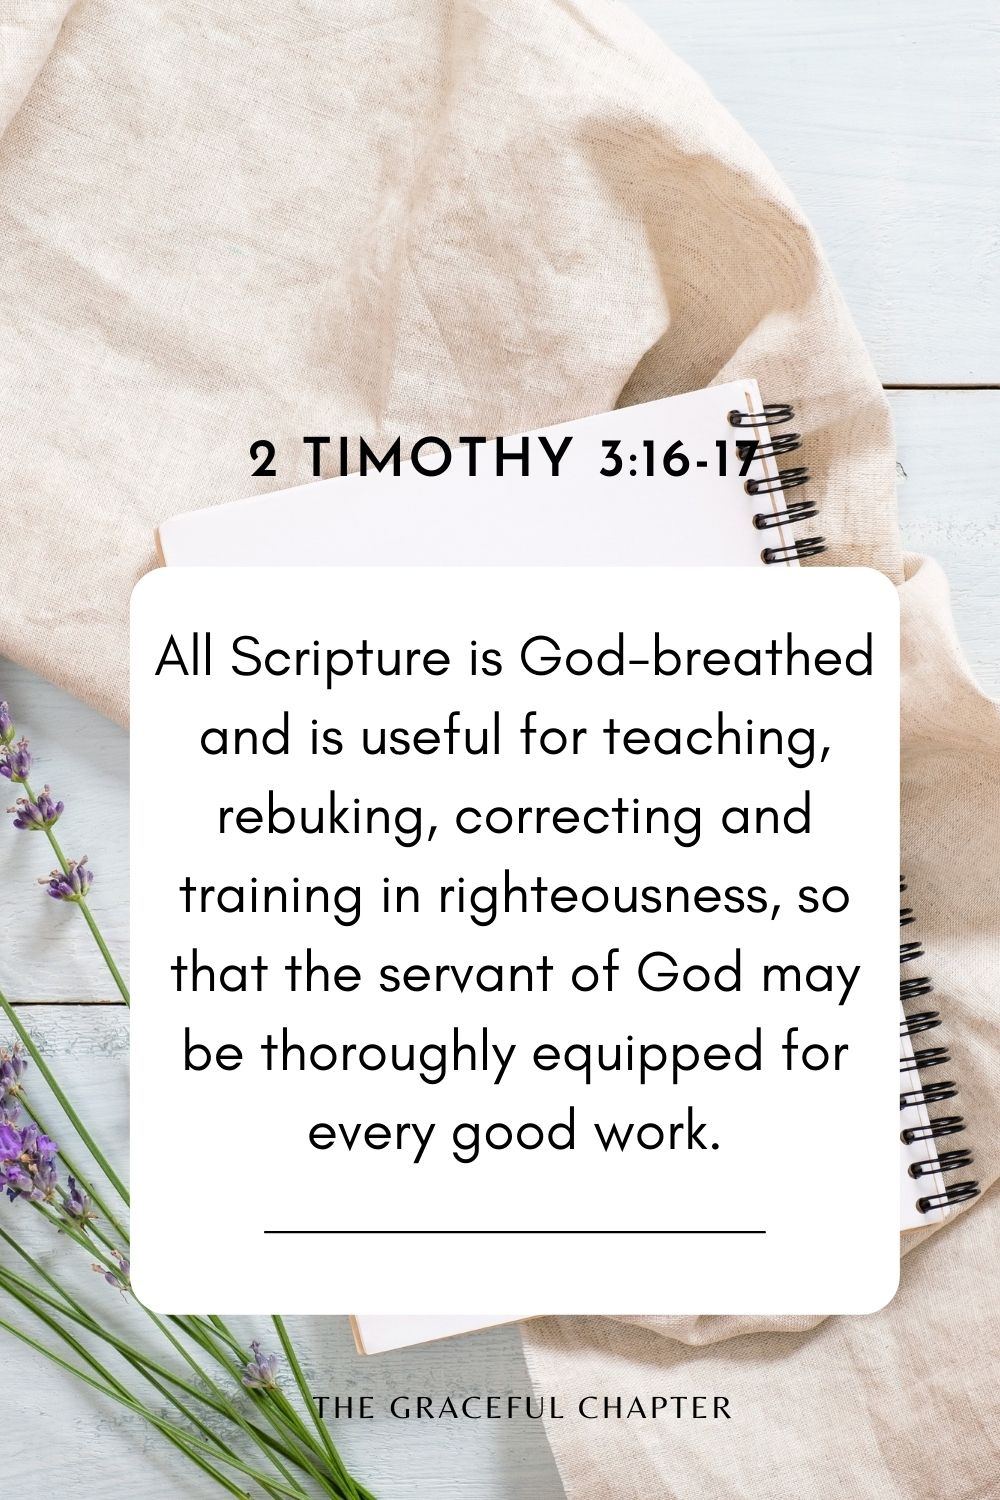 All Scripture is God-breathed and is useful for teaching, rebuking, correcting and training in righteousness, so that the servant of God may be thoroughly equipped for every good work. 2 Timothy 3:16-17